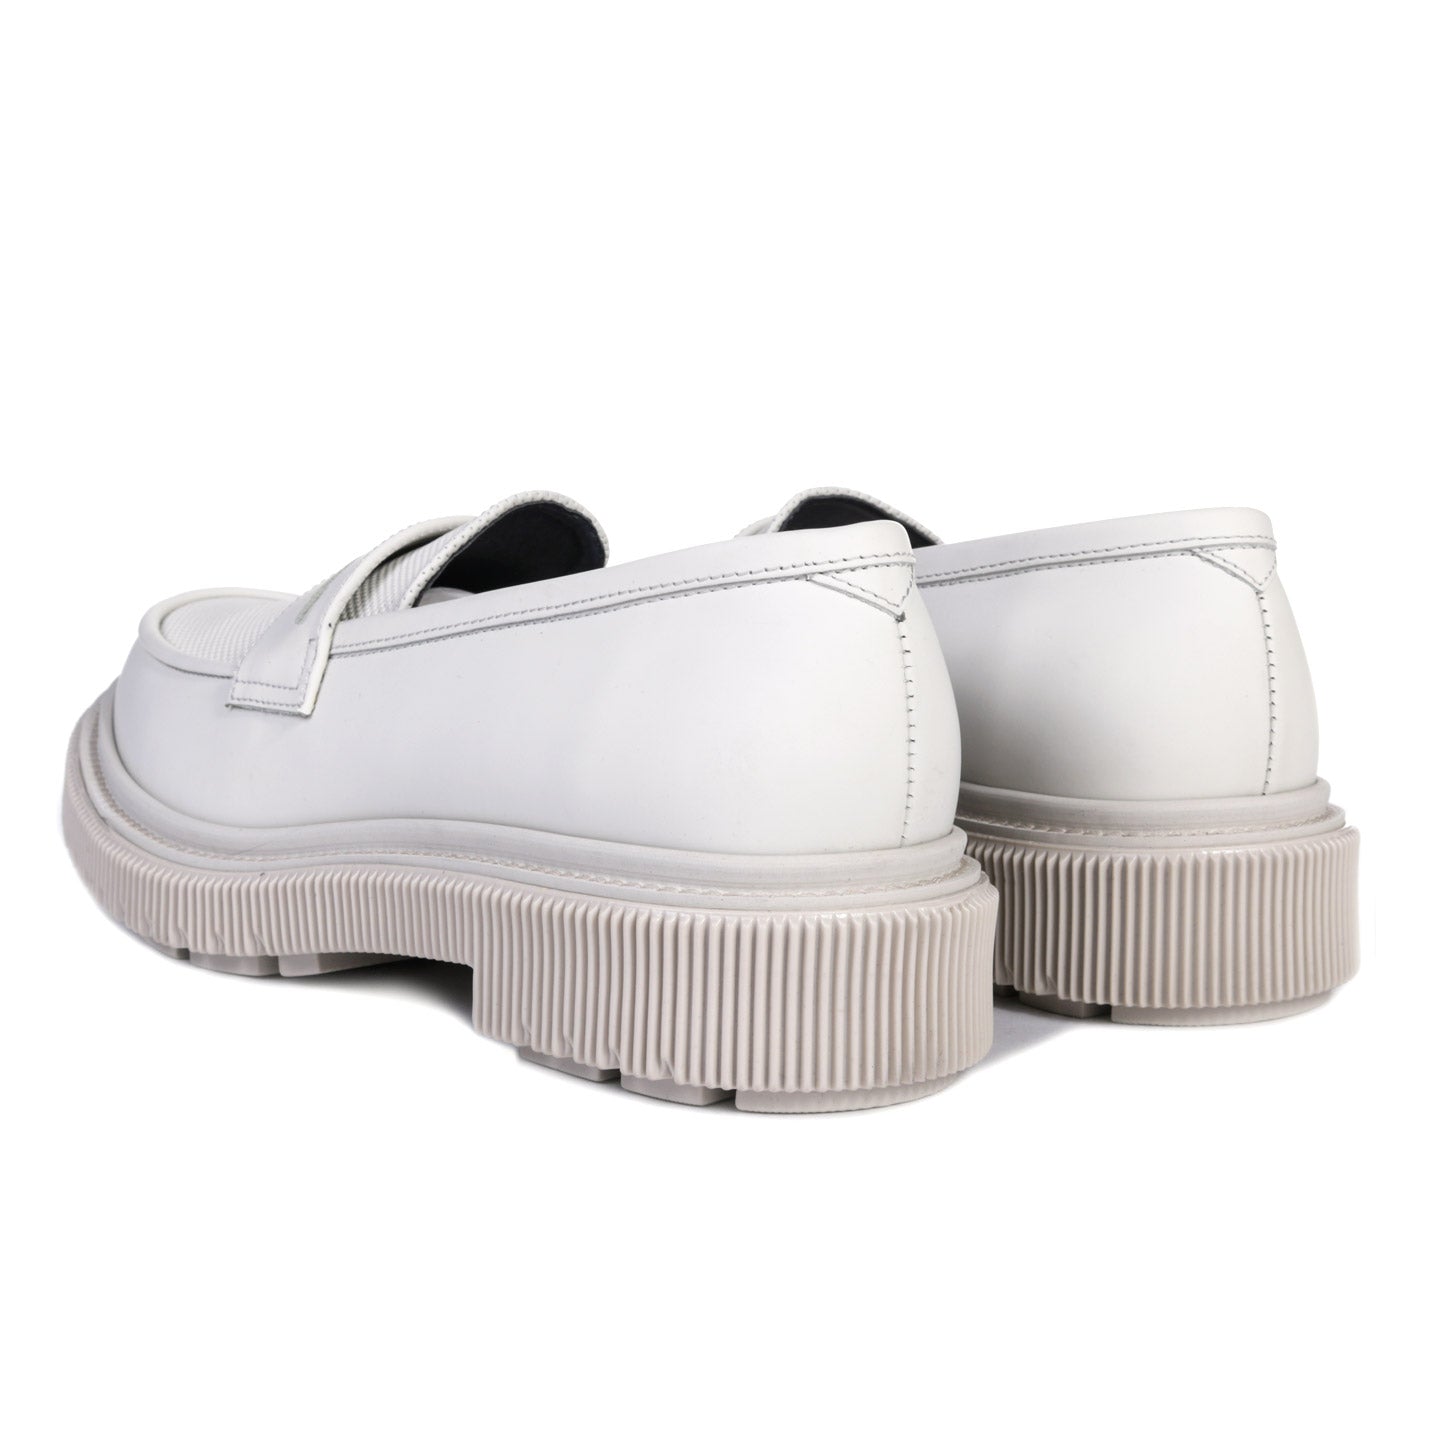 ADIEU TYPE 159 LOAFER POLIDO DOTS EMBOSSED WHITE